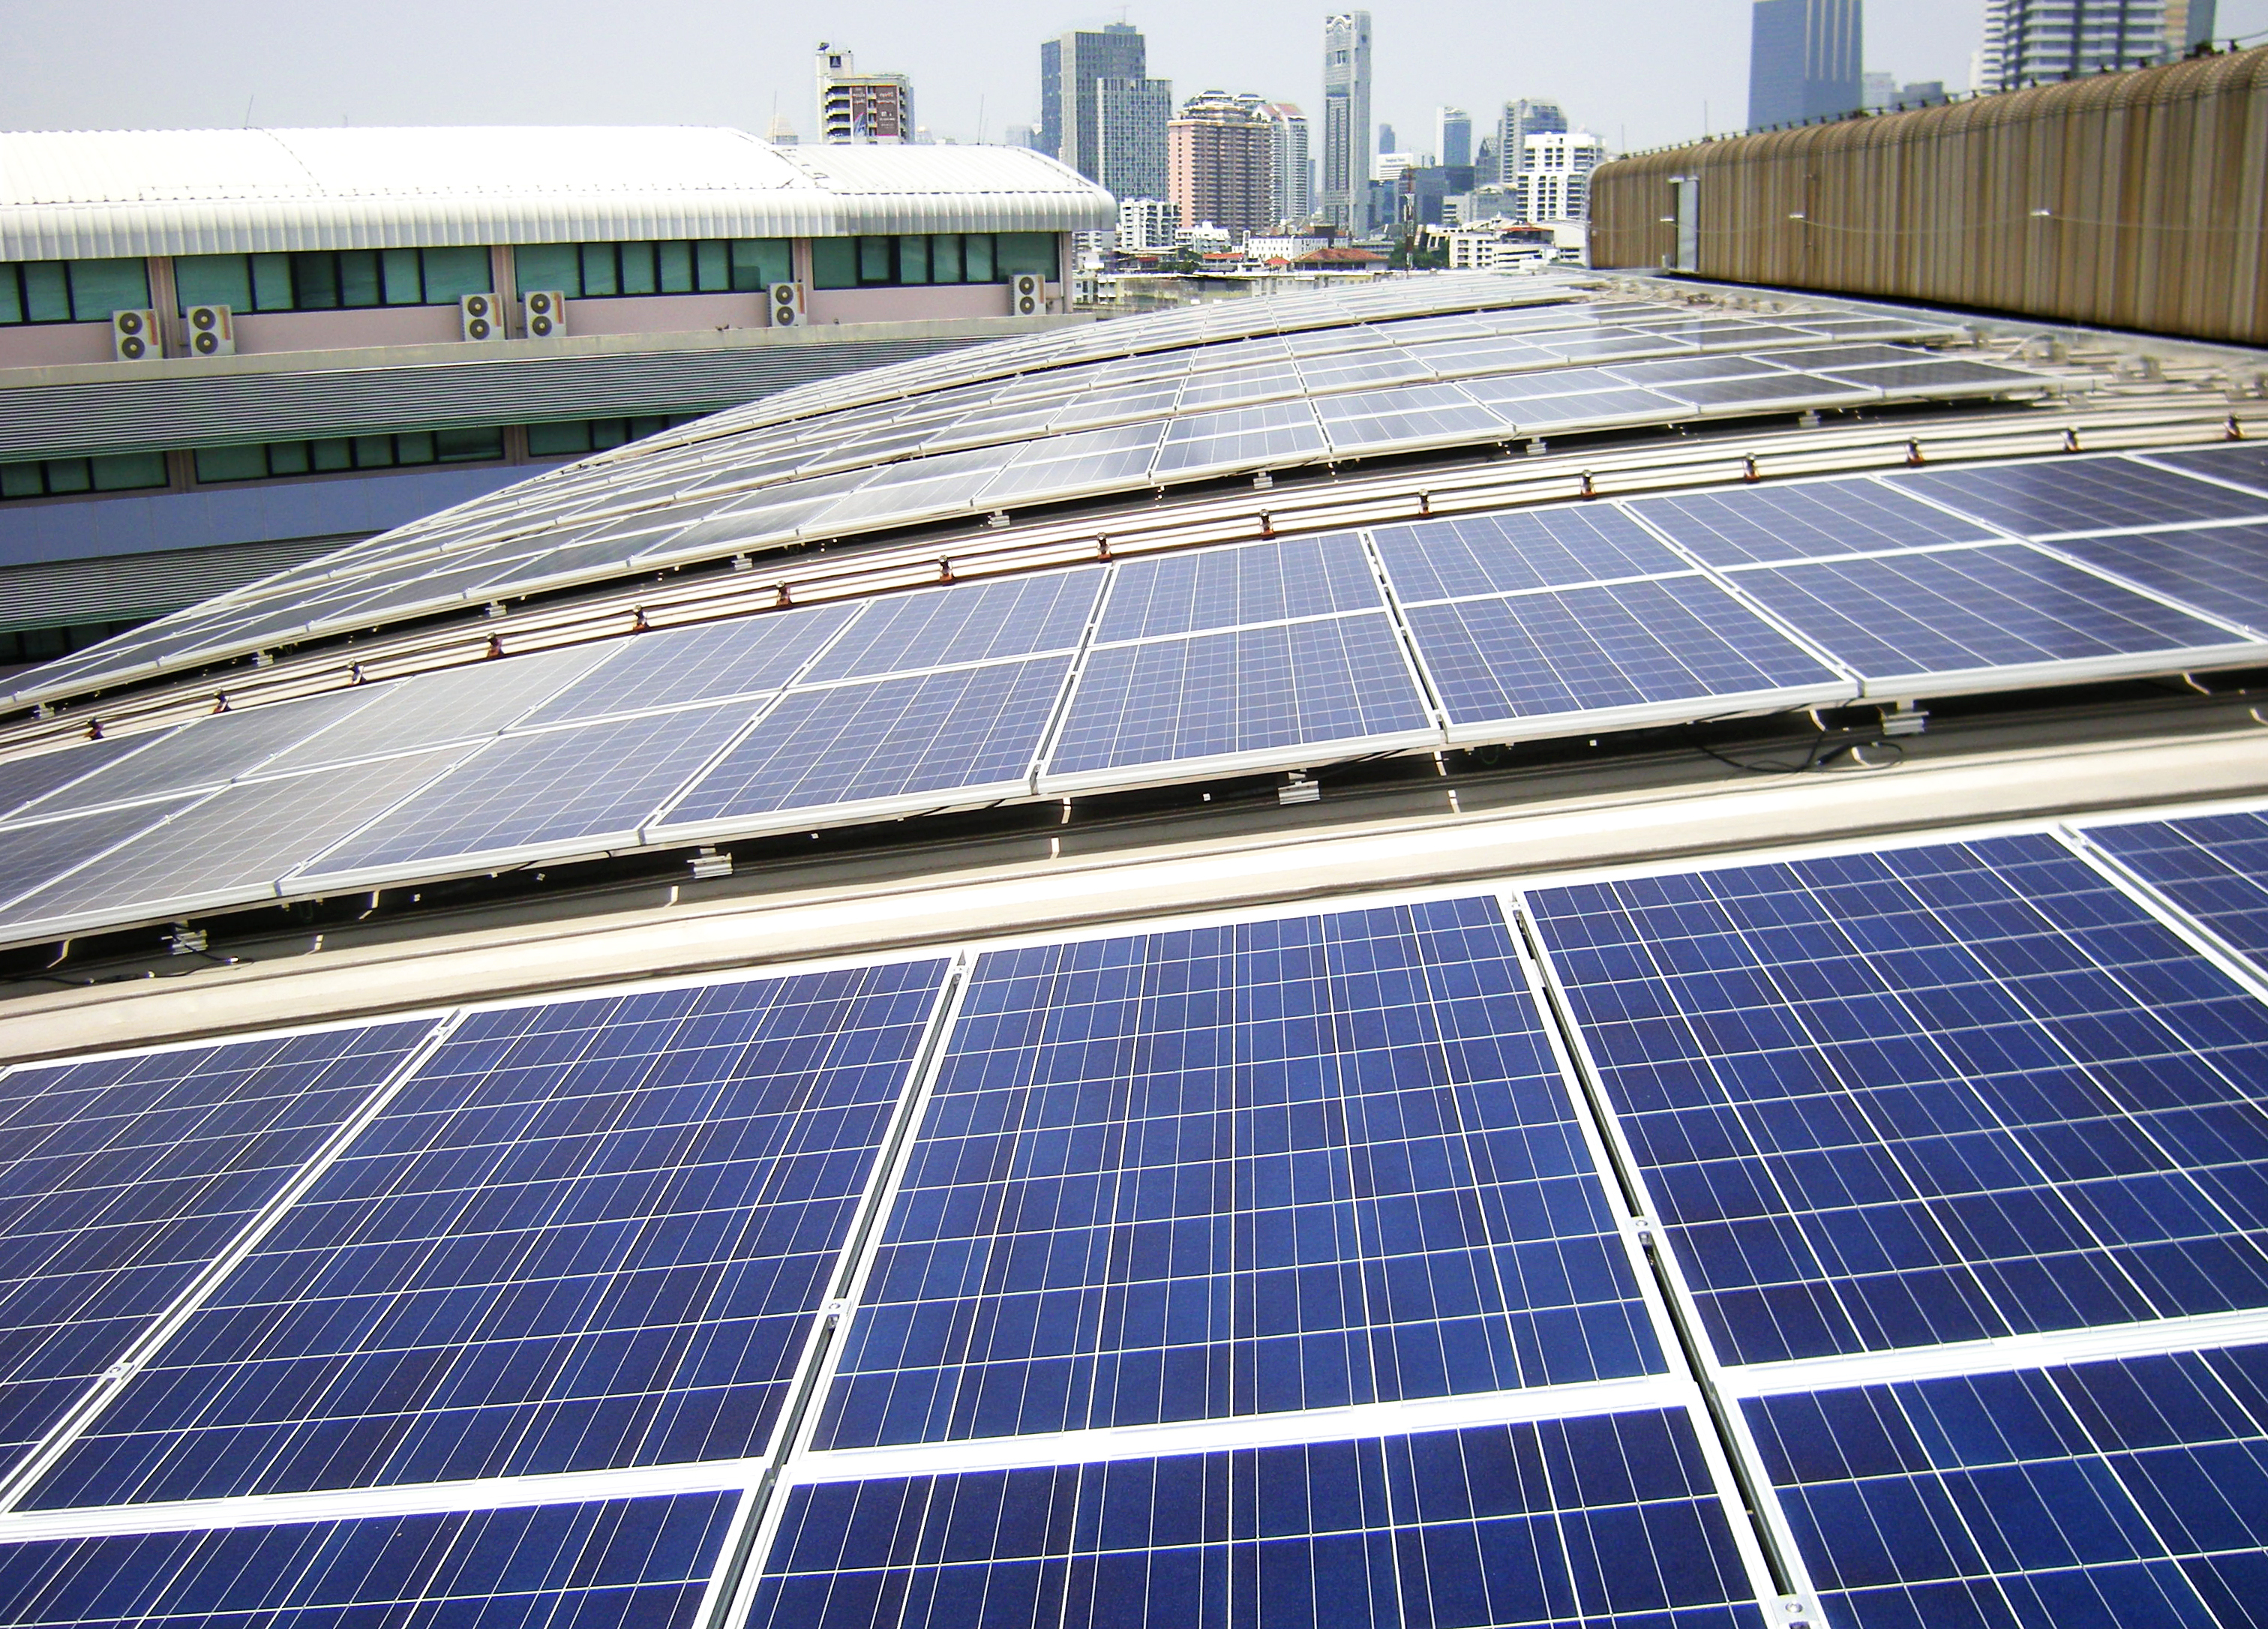 Rooftop Solar Funding– key considerations for project success